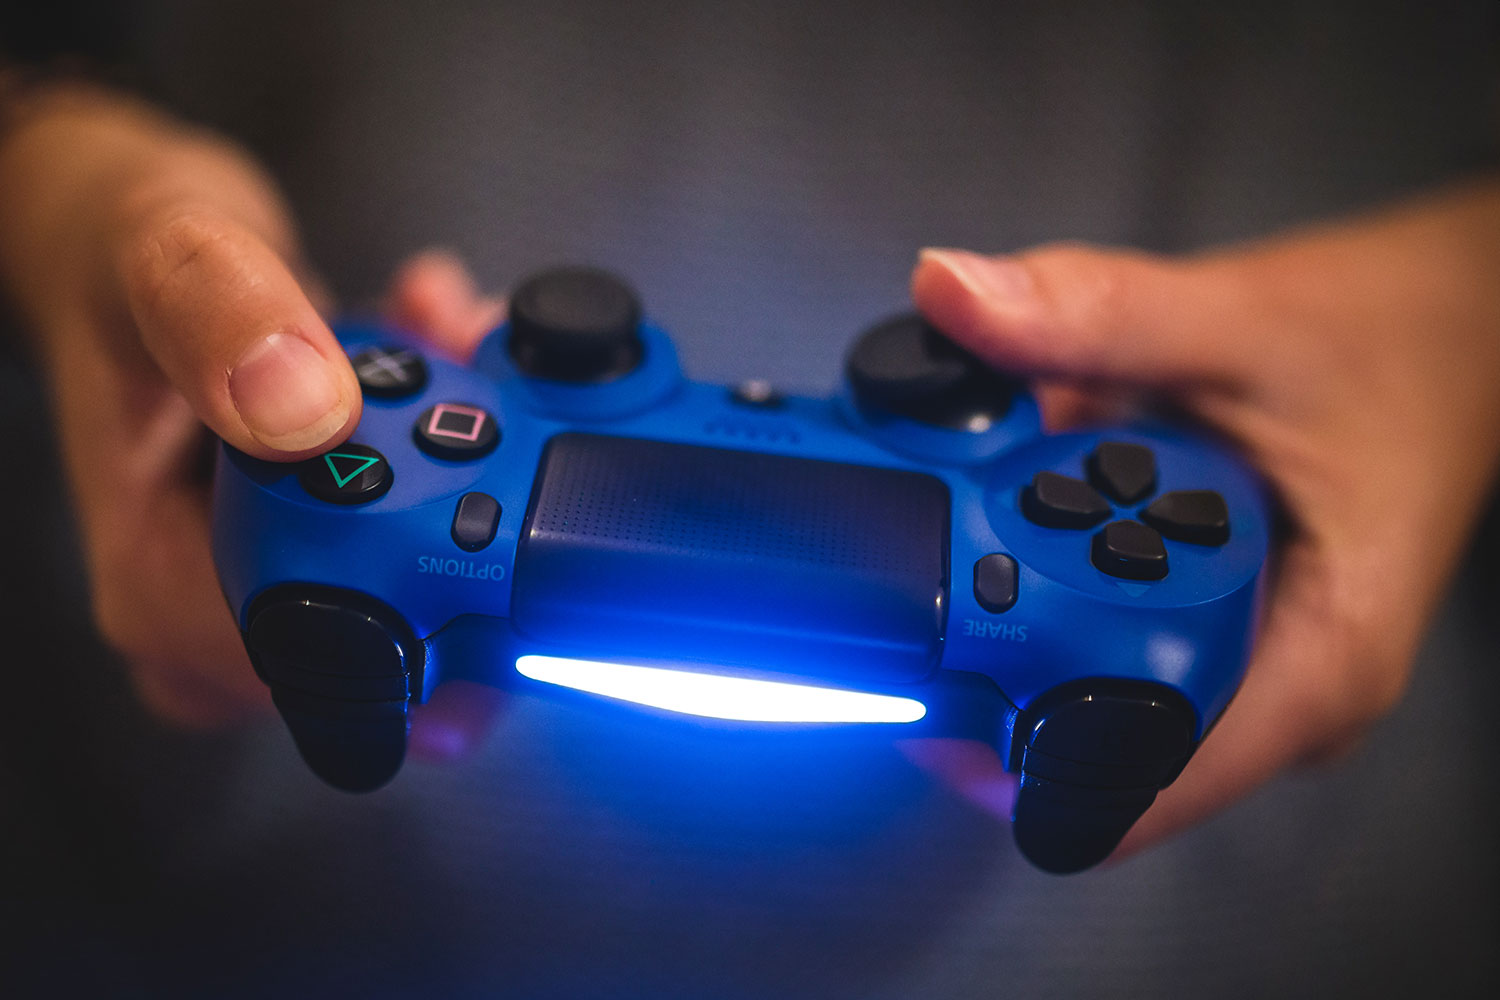 How to Get a Refund on Your PS4 Using Chat Support